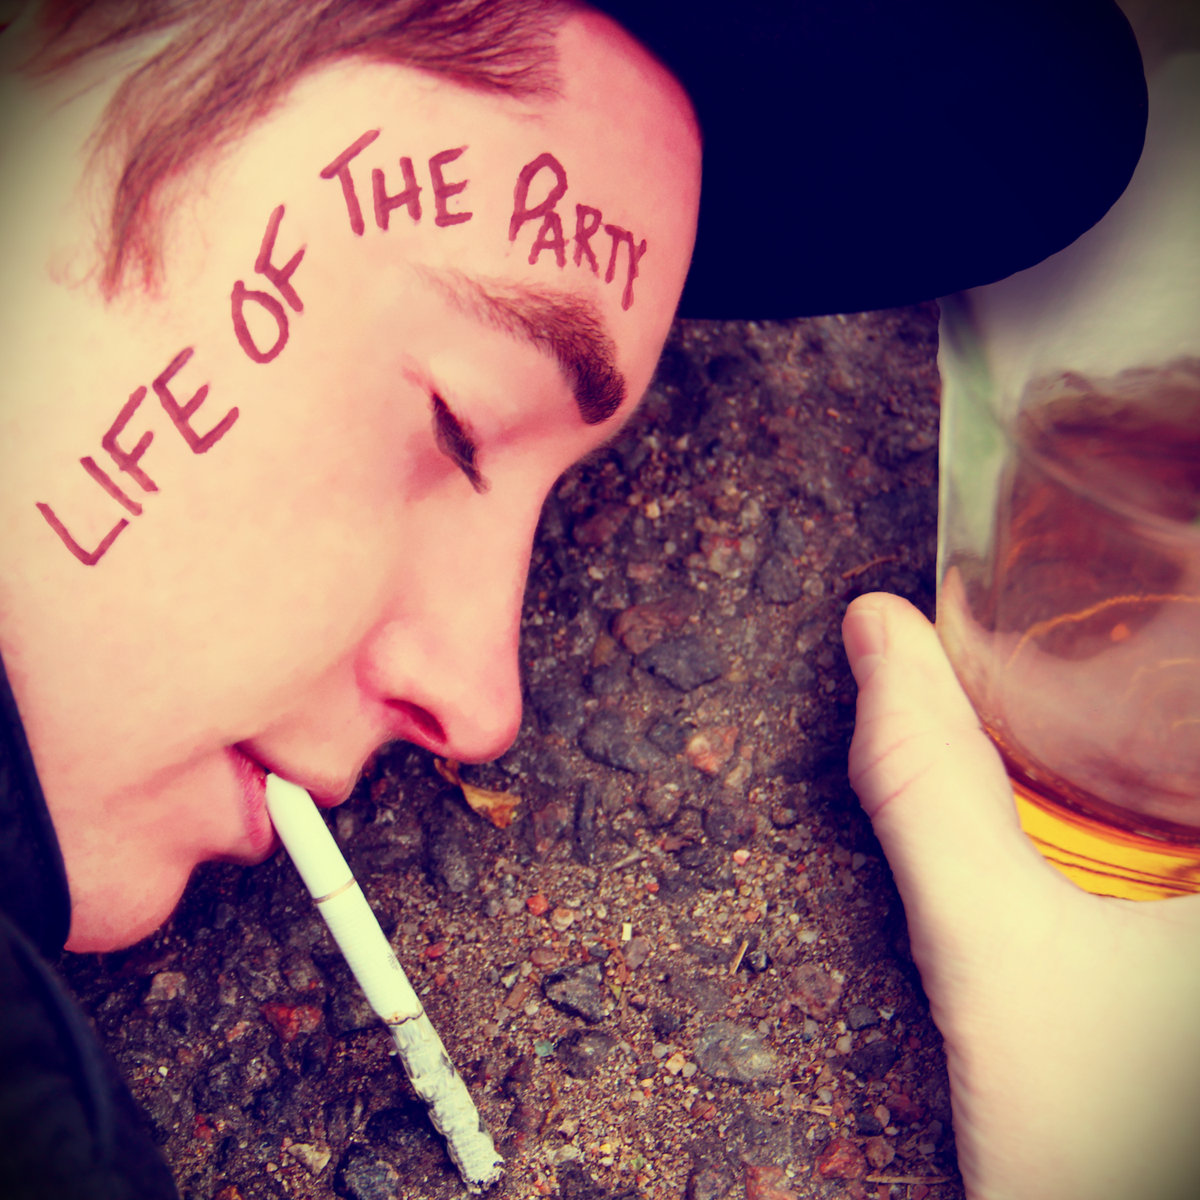 Samples - Life of the Party @ 'Life of the Party' album (electronic, dubstep)